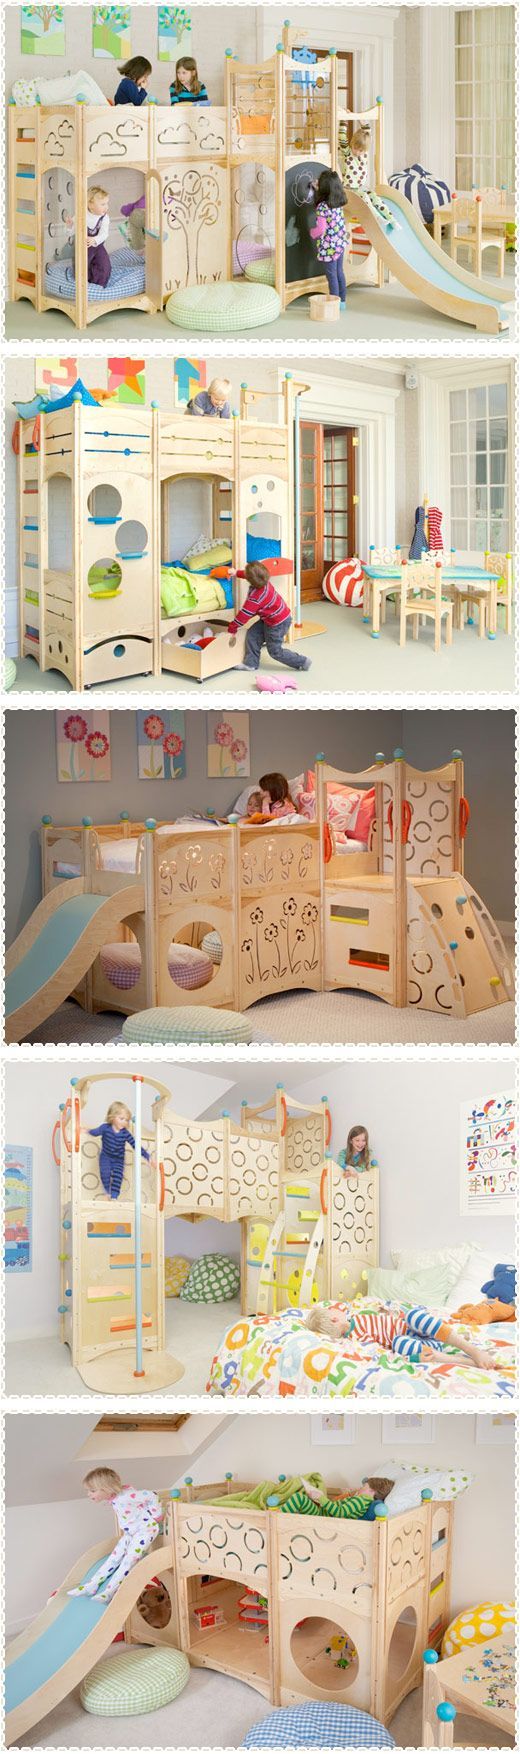 I pinned this because these look really fun for your child and will keep them very active making it easier for naptime!